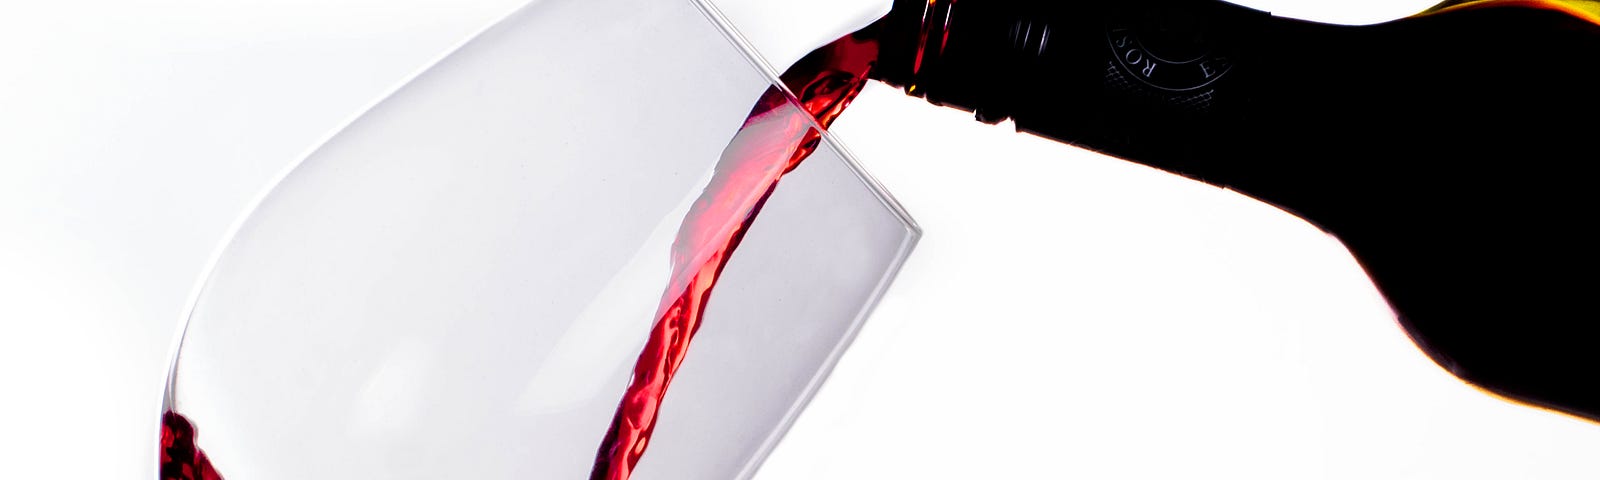 A wine bottle emerges from the right, nearly horizontal to pour red wine into a glass angled (45 degrees) towards the bottle.